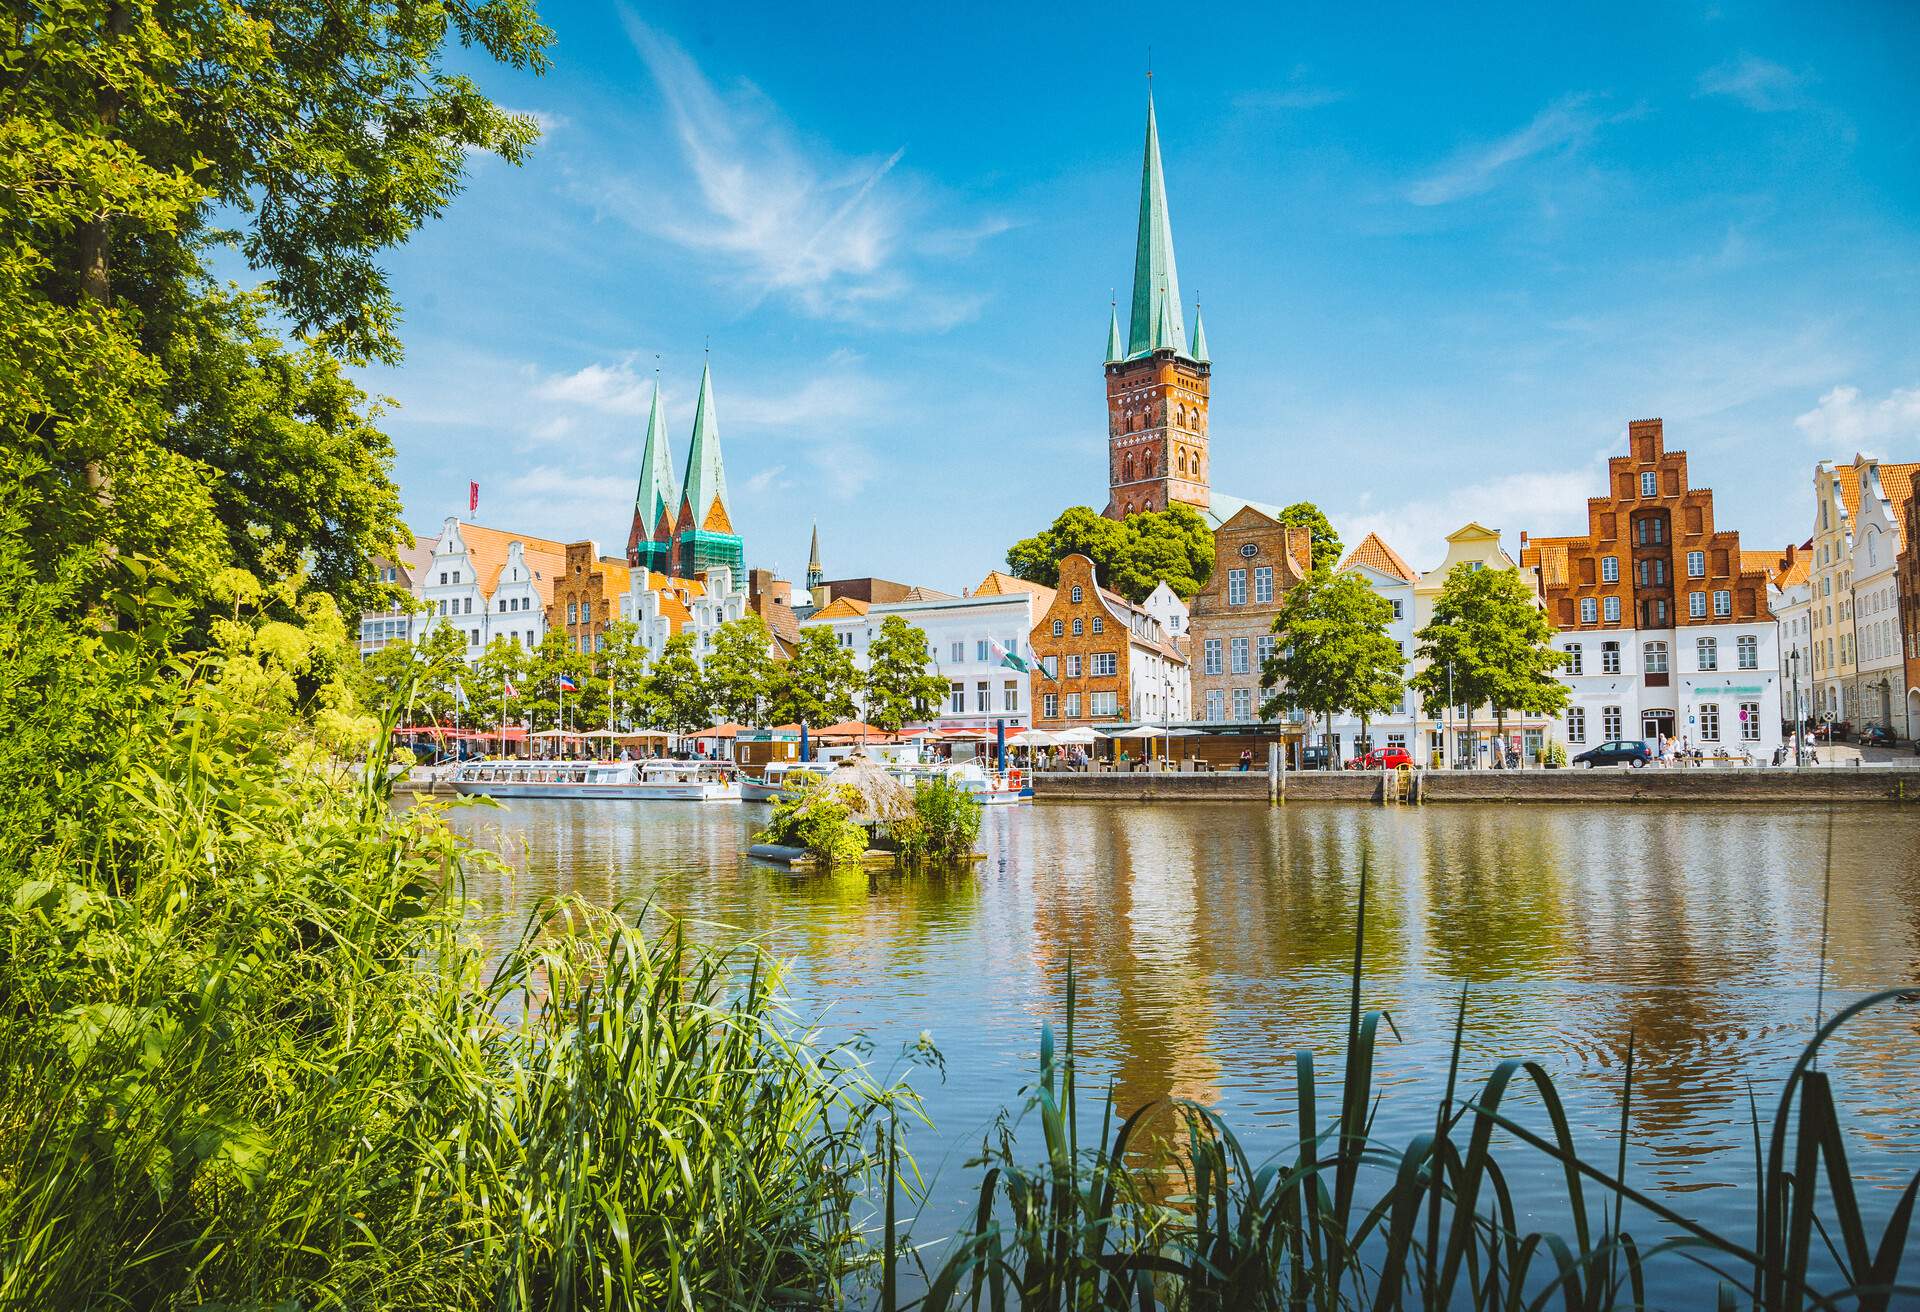 DEST_GERMANY_LÜBECK_GettyImages-1051077986